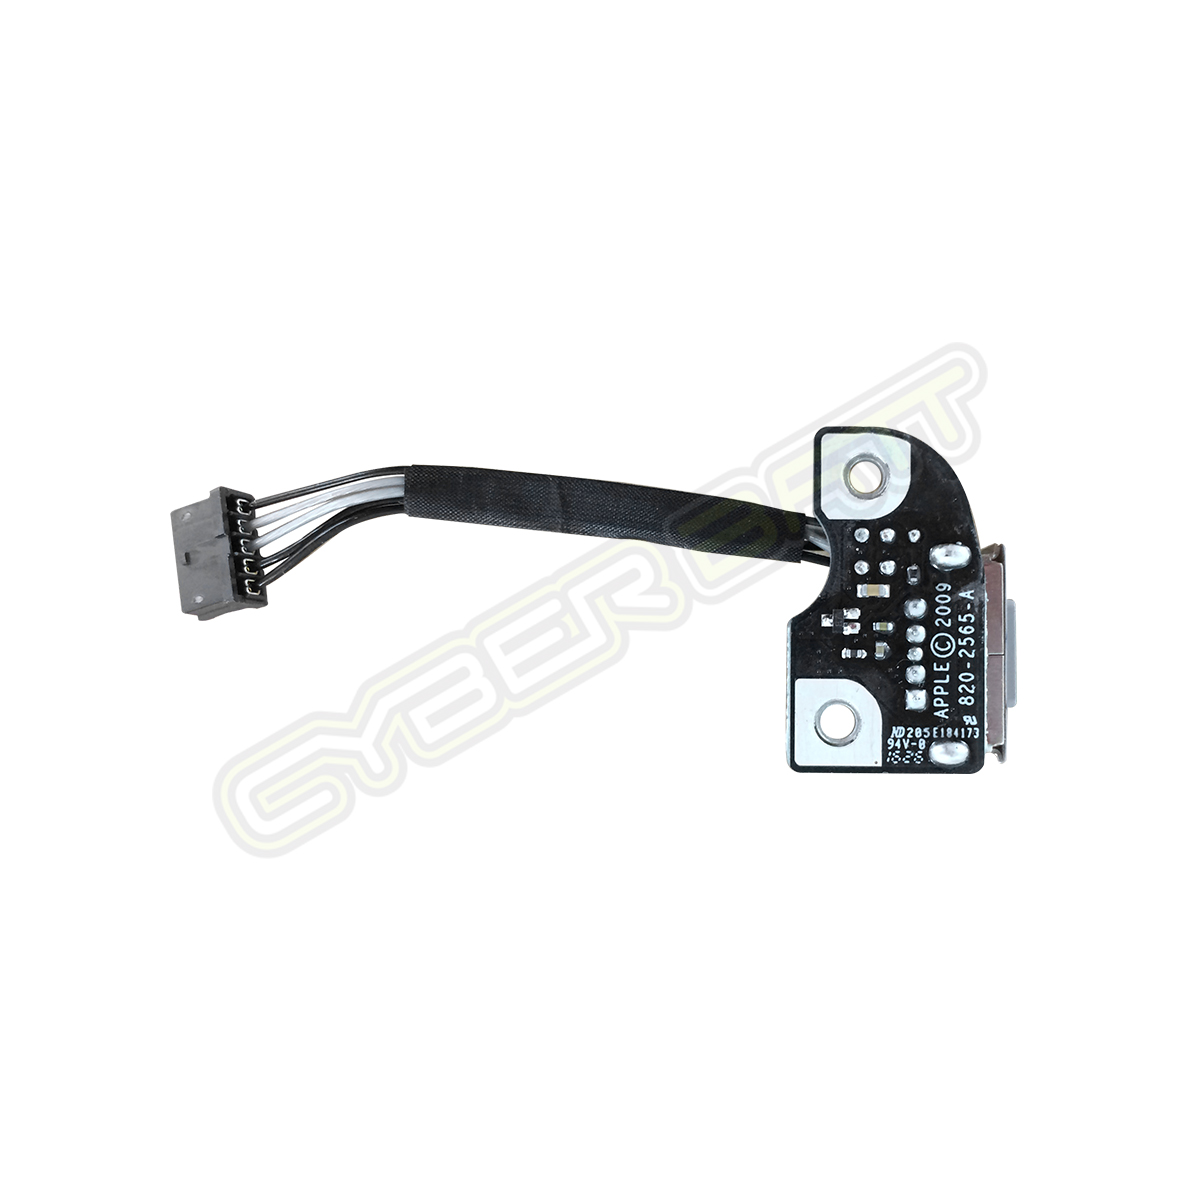 DC IN BOARD MacBook pro 13 inch  A1278 A1286 (Mid 2009-Mid 2012) 820-2565-A